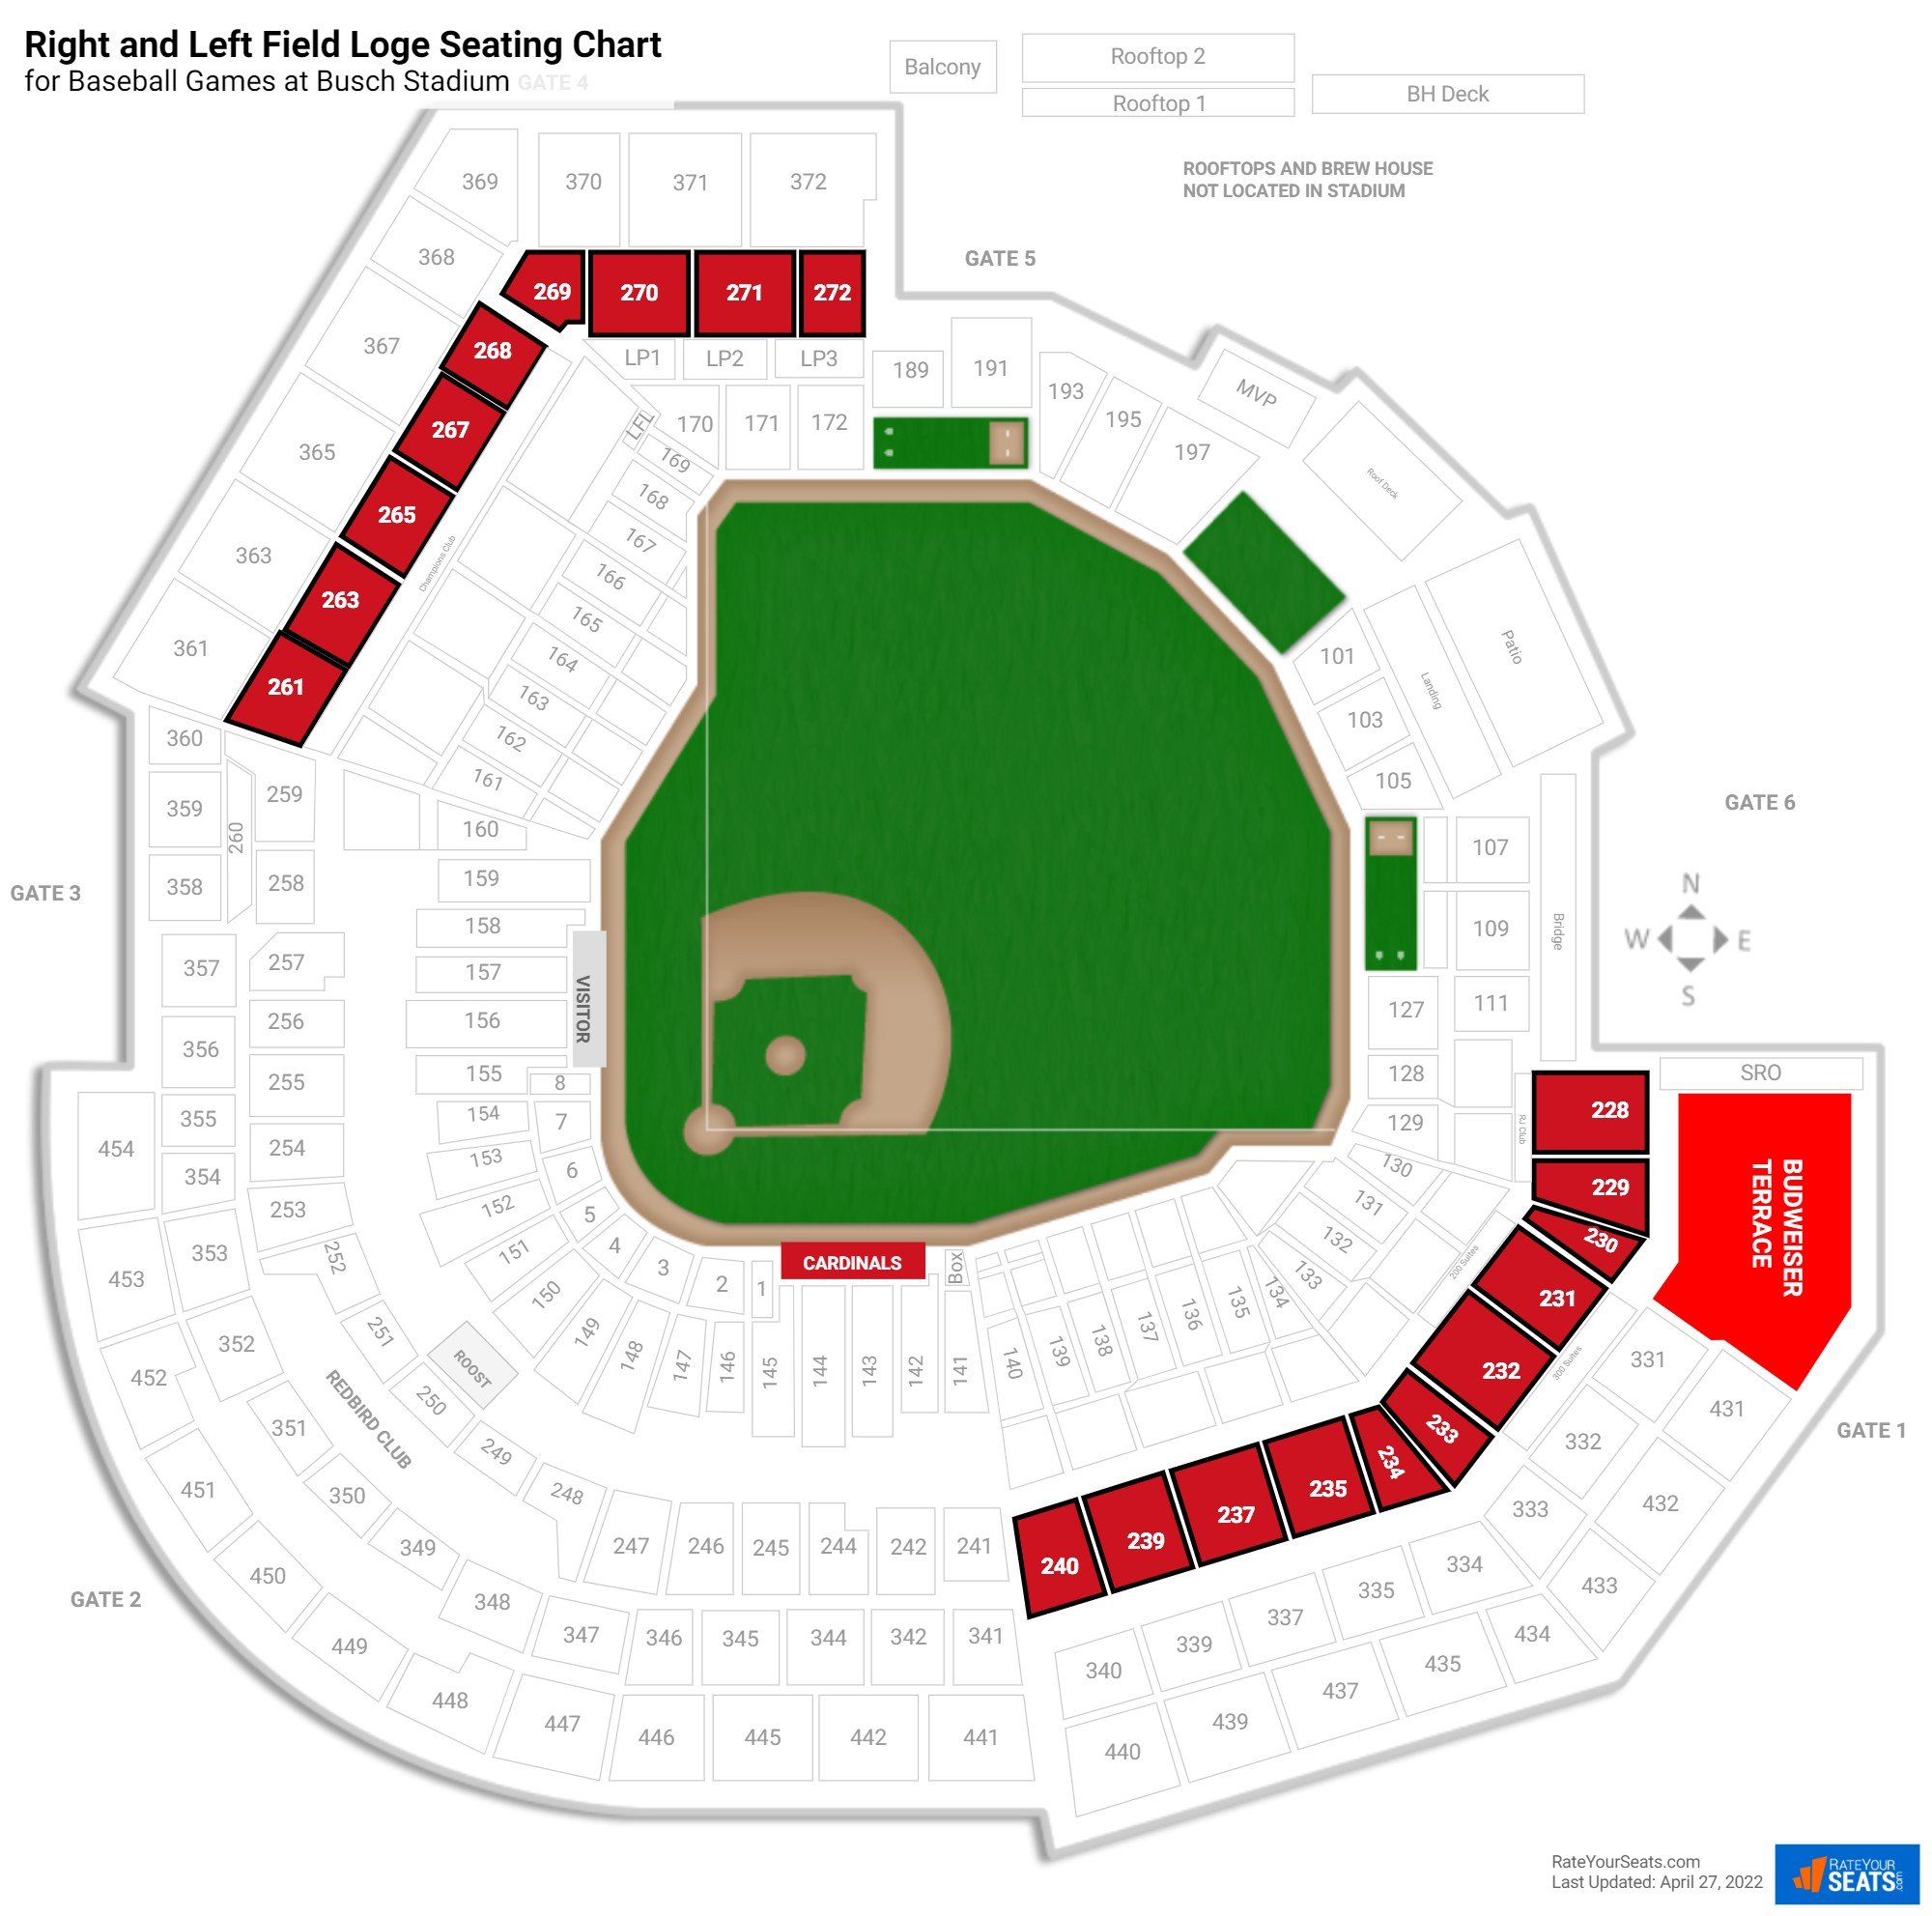 Baseball Right and Left Field Loge Seating Chart at Busch Stadium